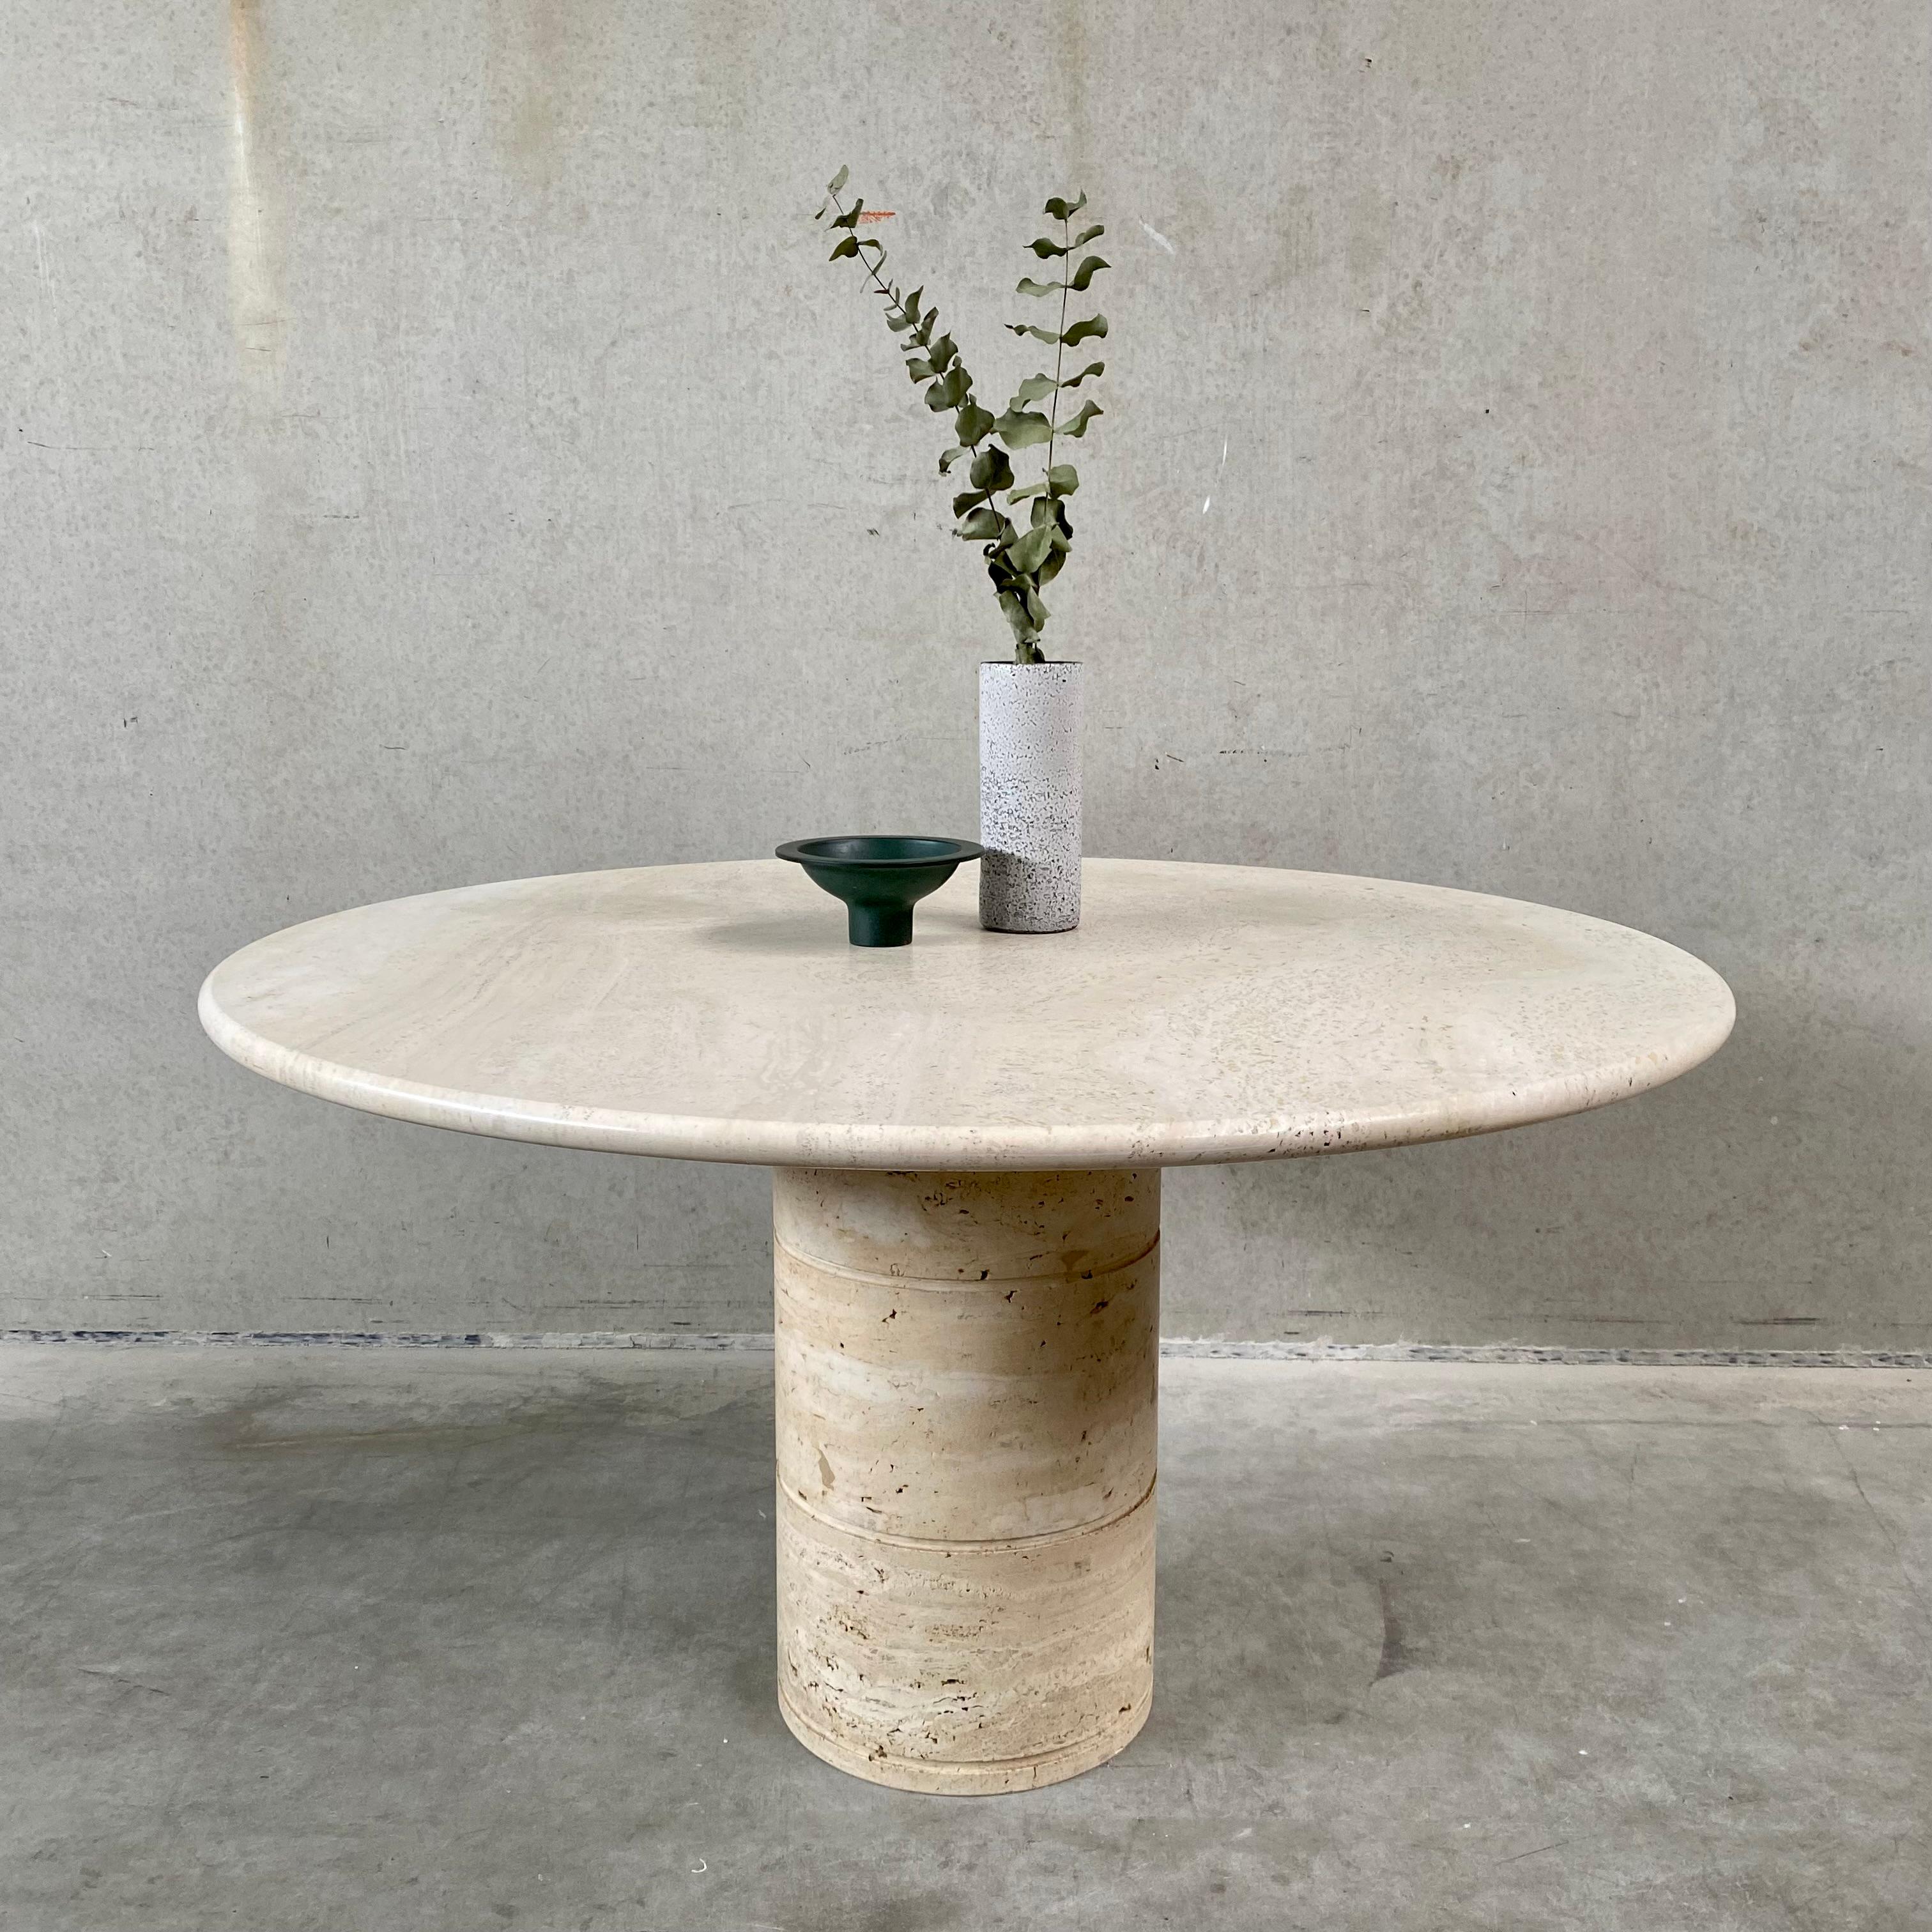 TRAVERTINE ROUND DINING TABLE FOR UP & UP, ITALY 1970S

The earthy tones and drawings of this table are truly enchanting. From the thickness of the top you can clearly read the quality of the table. Italian designers know better than anyone how to